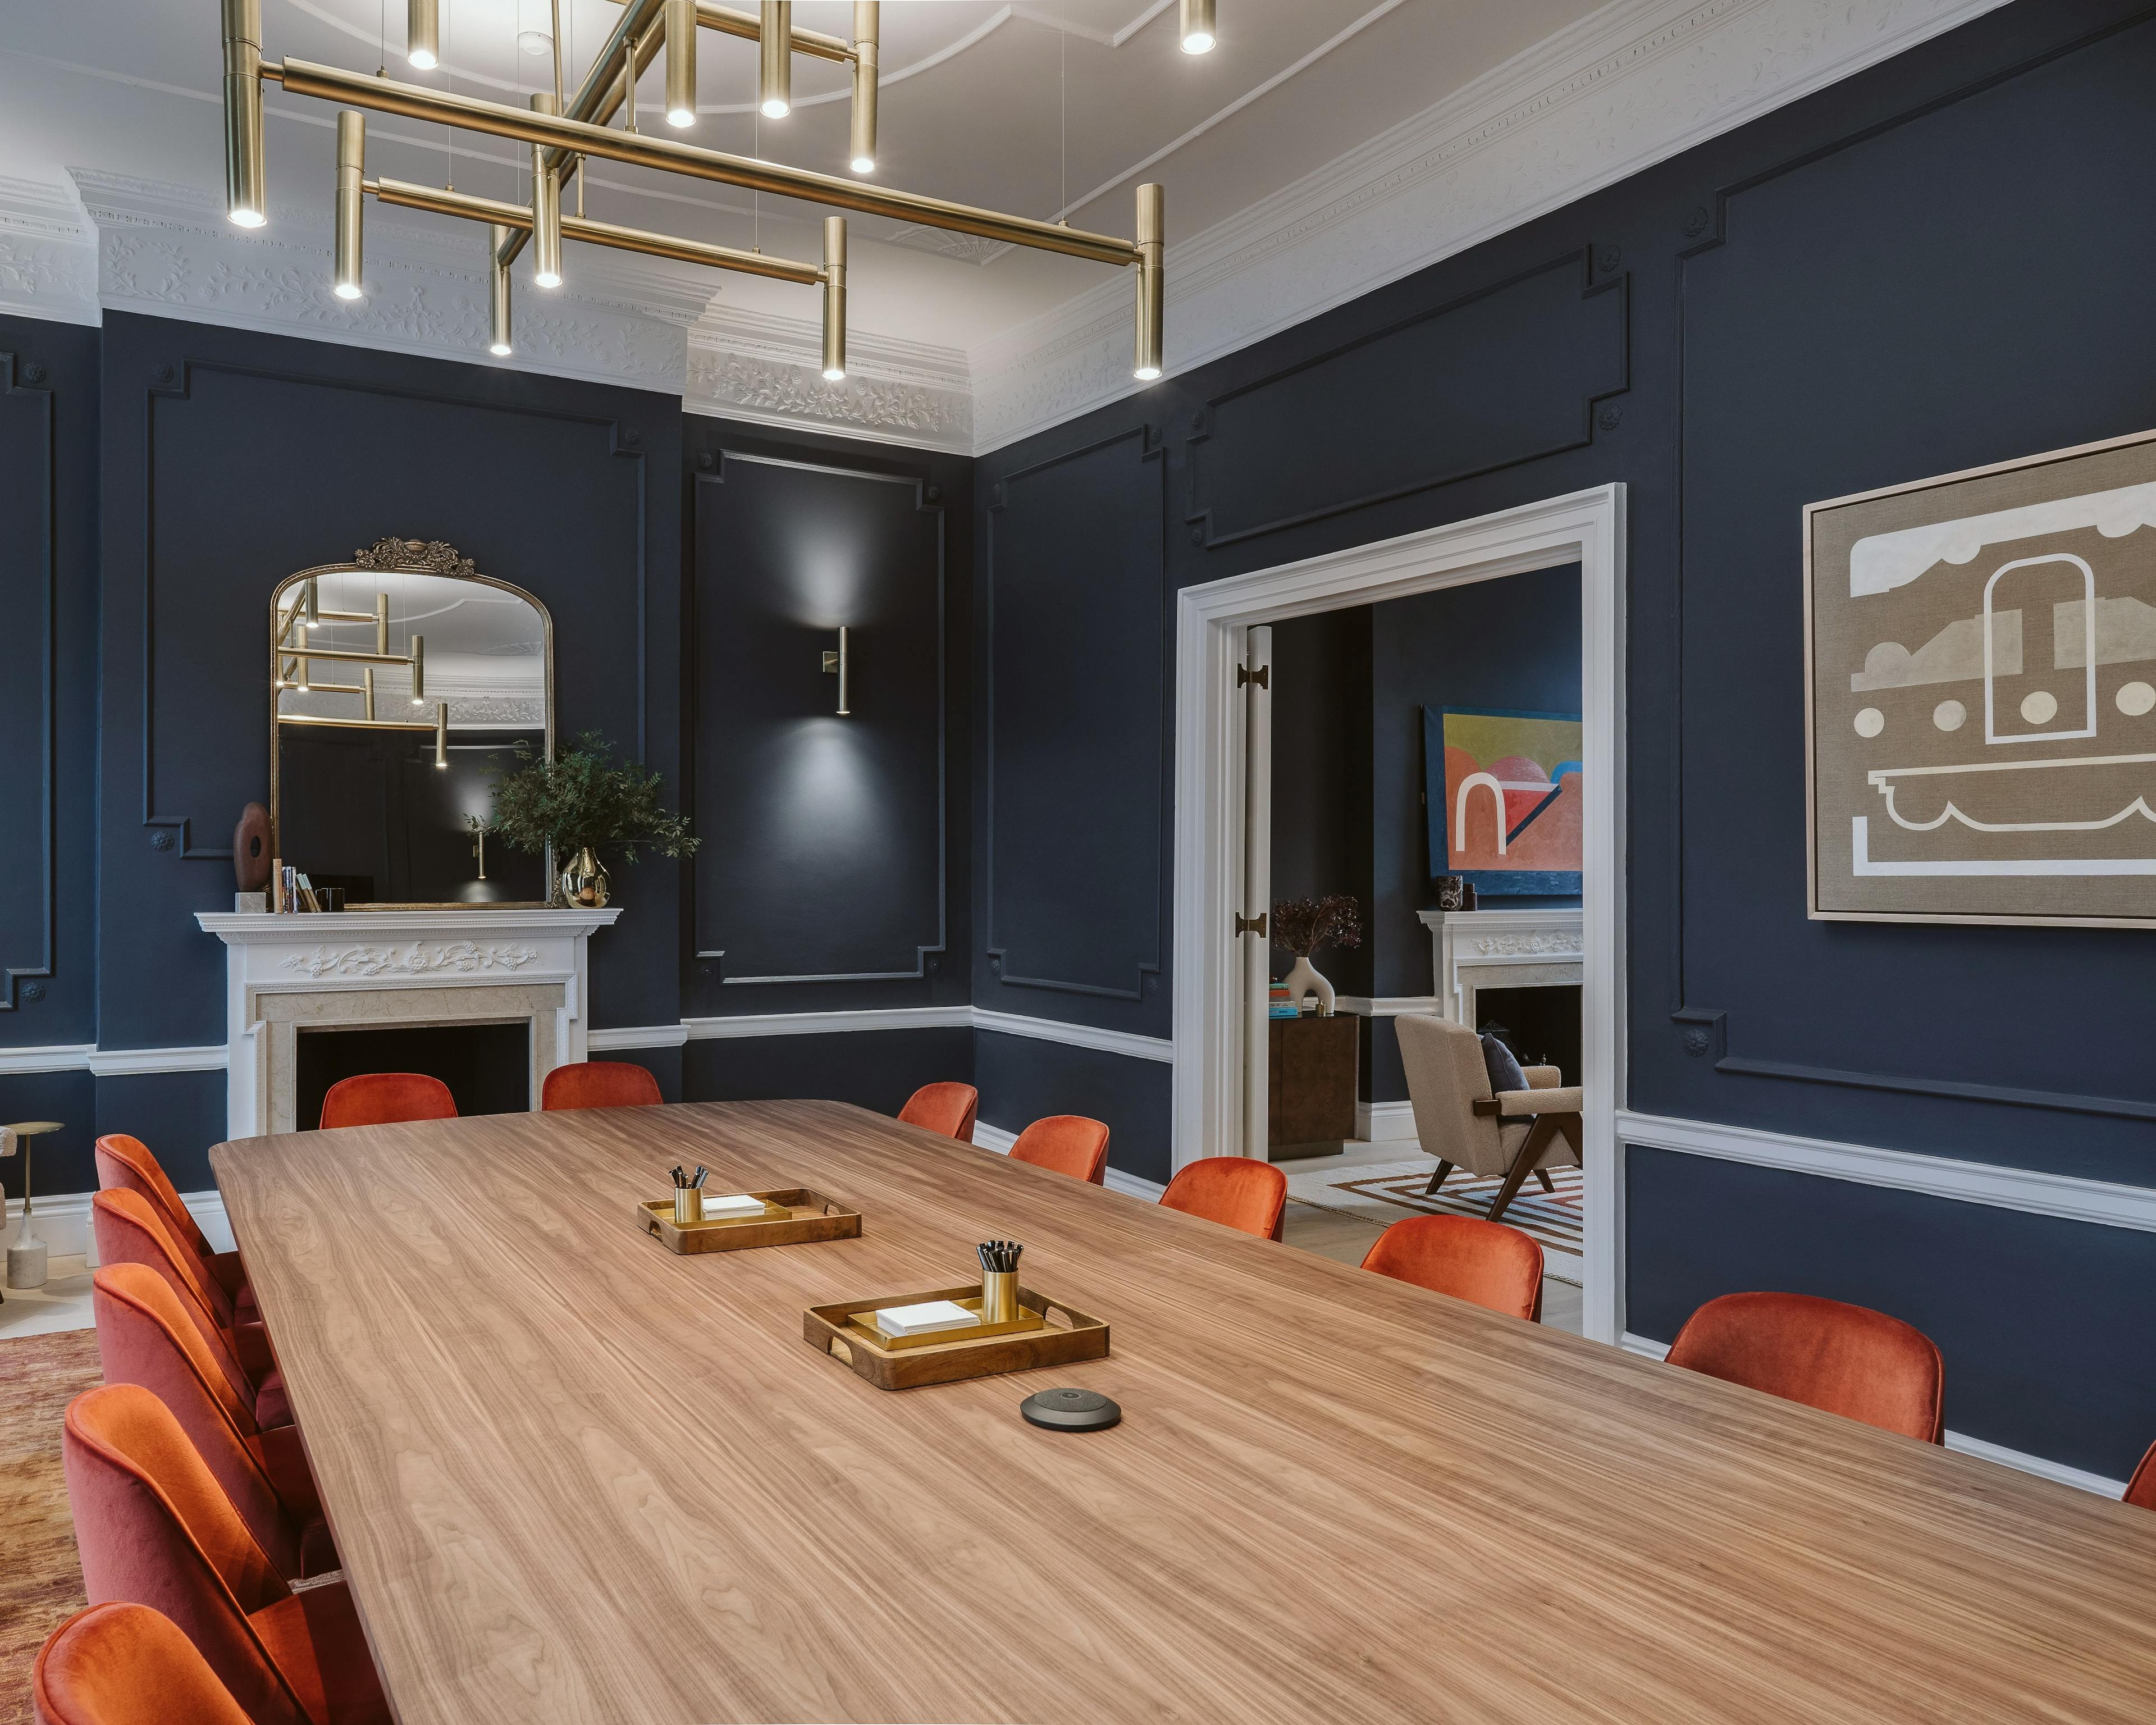 A conference room at Chief London with a long wooden table, orange chairs, and two original paintings, one by artist Kristin Texeira and one by artist Carla Weeks, installed on dark blue walls.